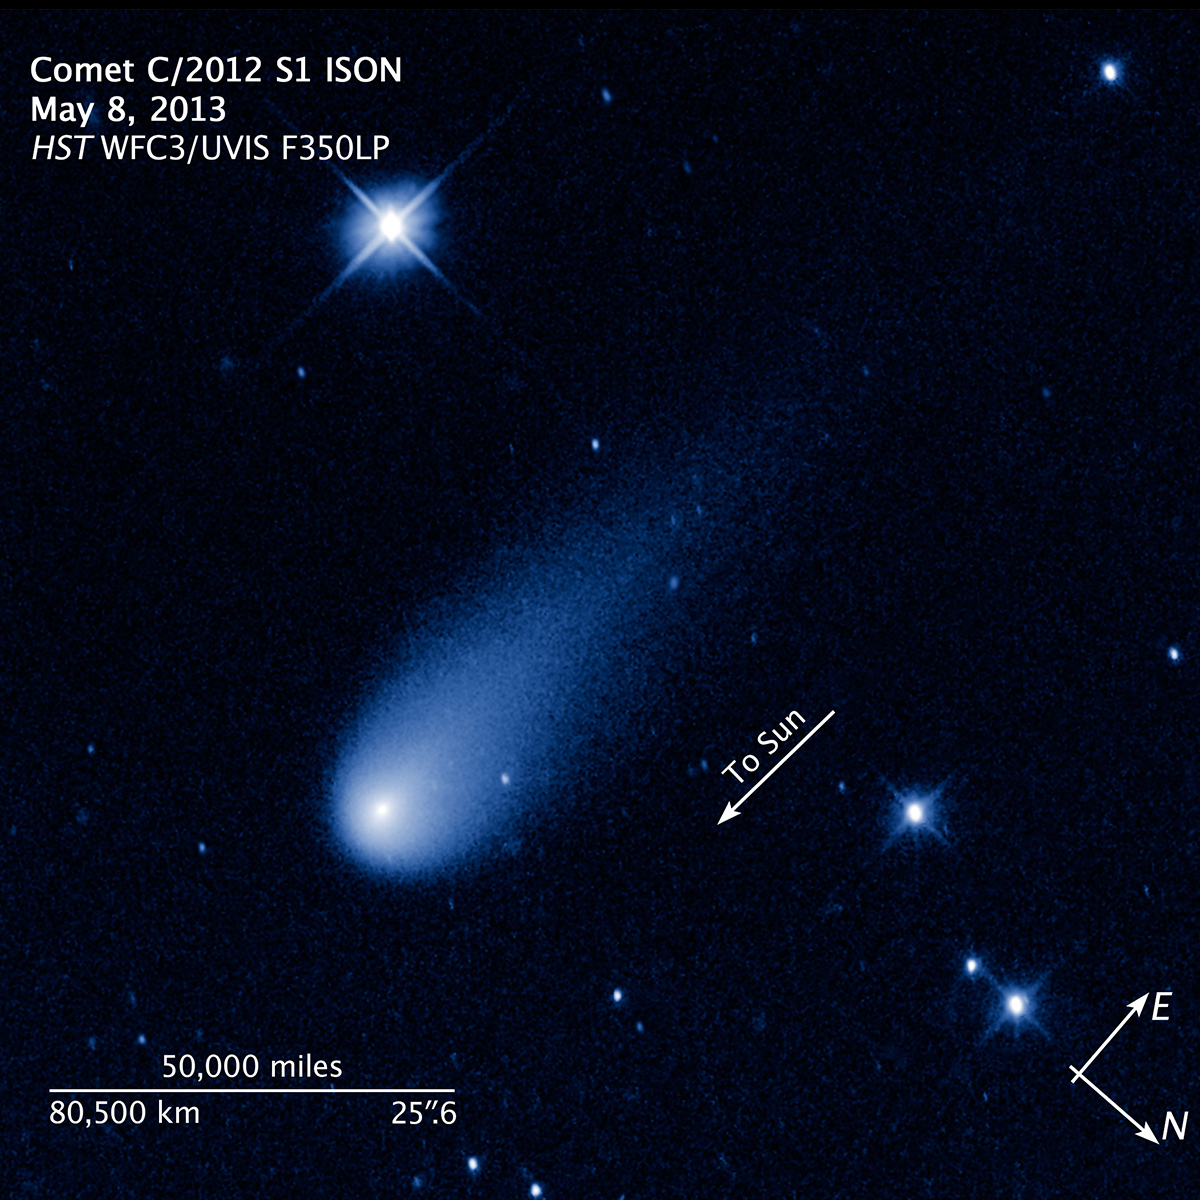 This false-color, visible-light image of comet ISON was taken with Hubble's Wide Field Camera 3.